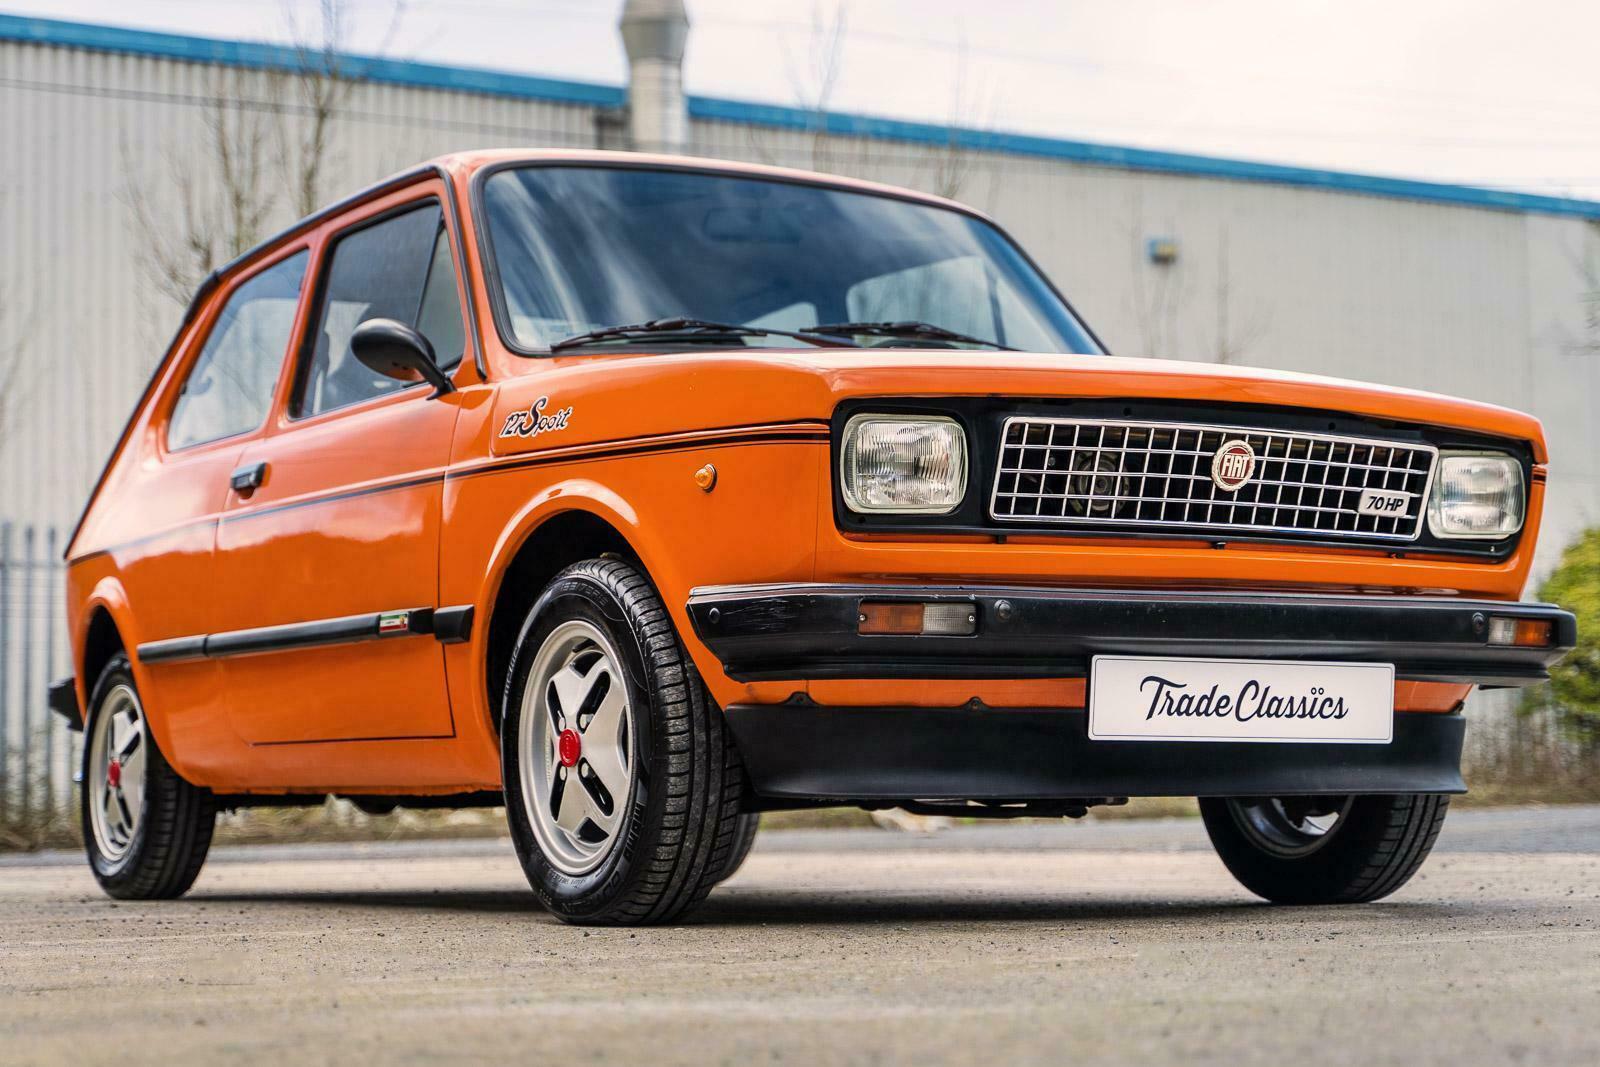 This Fiat 127 Sport replica is an Abarth in all but name